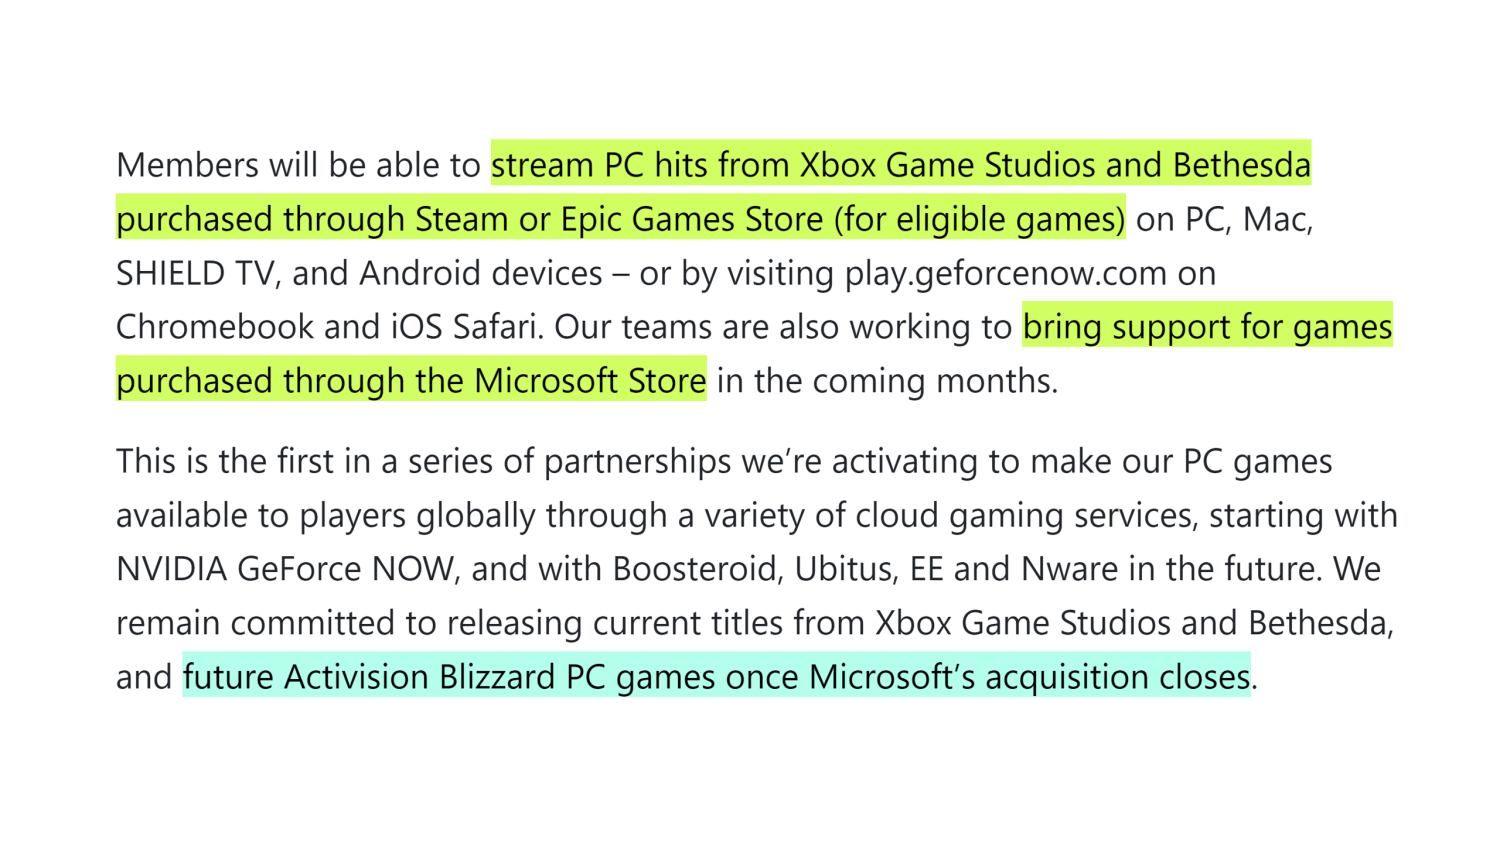 Microsoft acquires a whole bunch of game studios